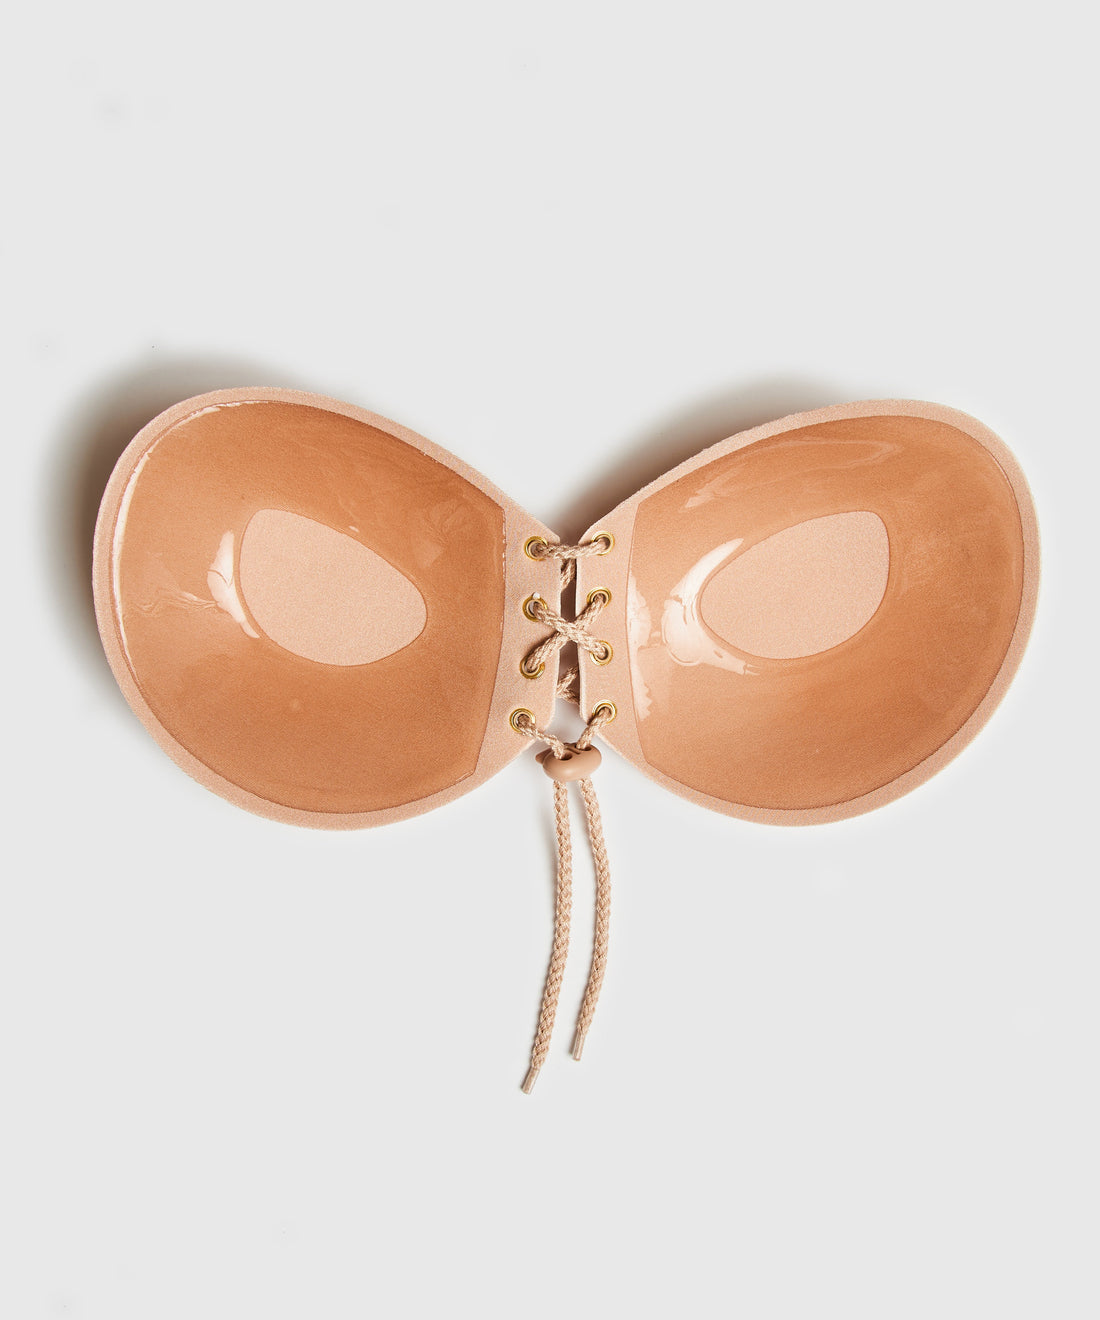 Invisible Stick On Bra With Straps In Different Cup Sizes_135447_Tan_02